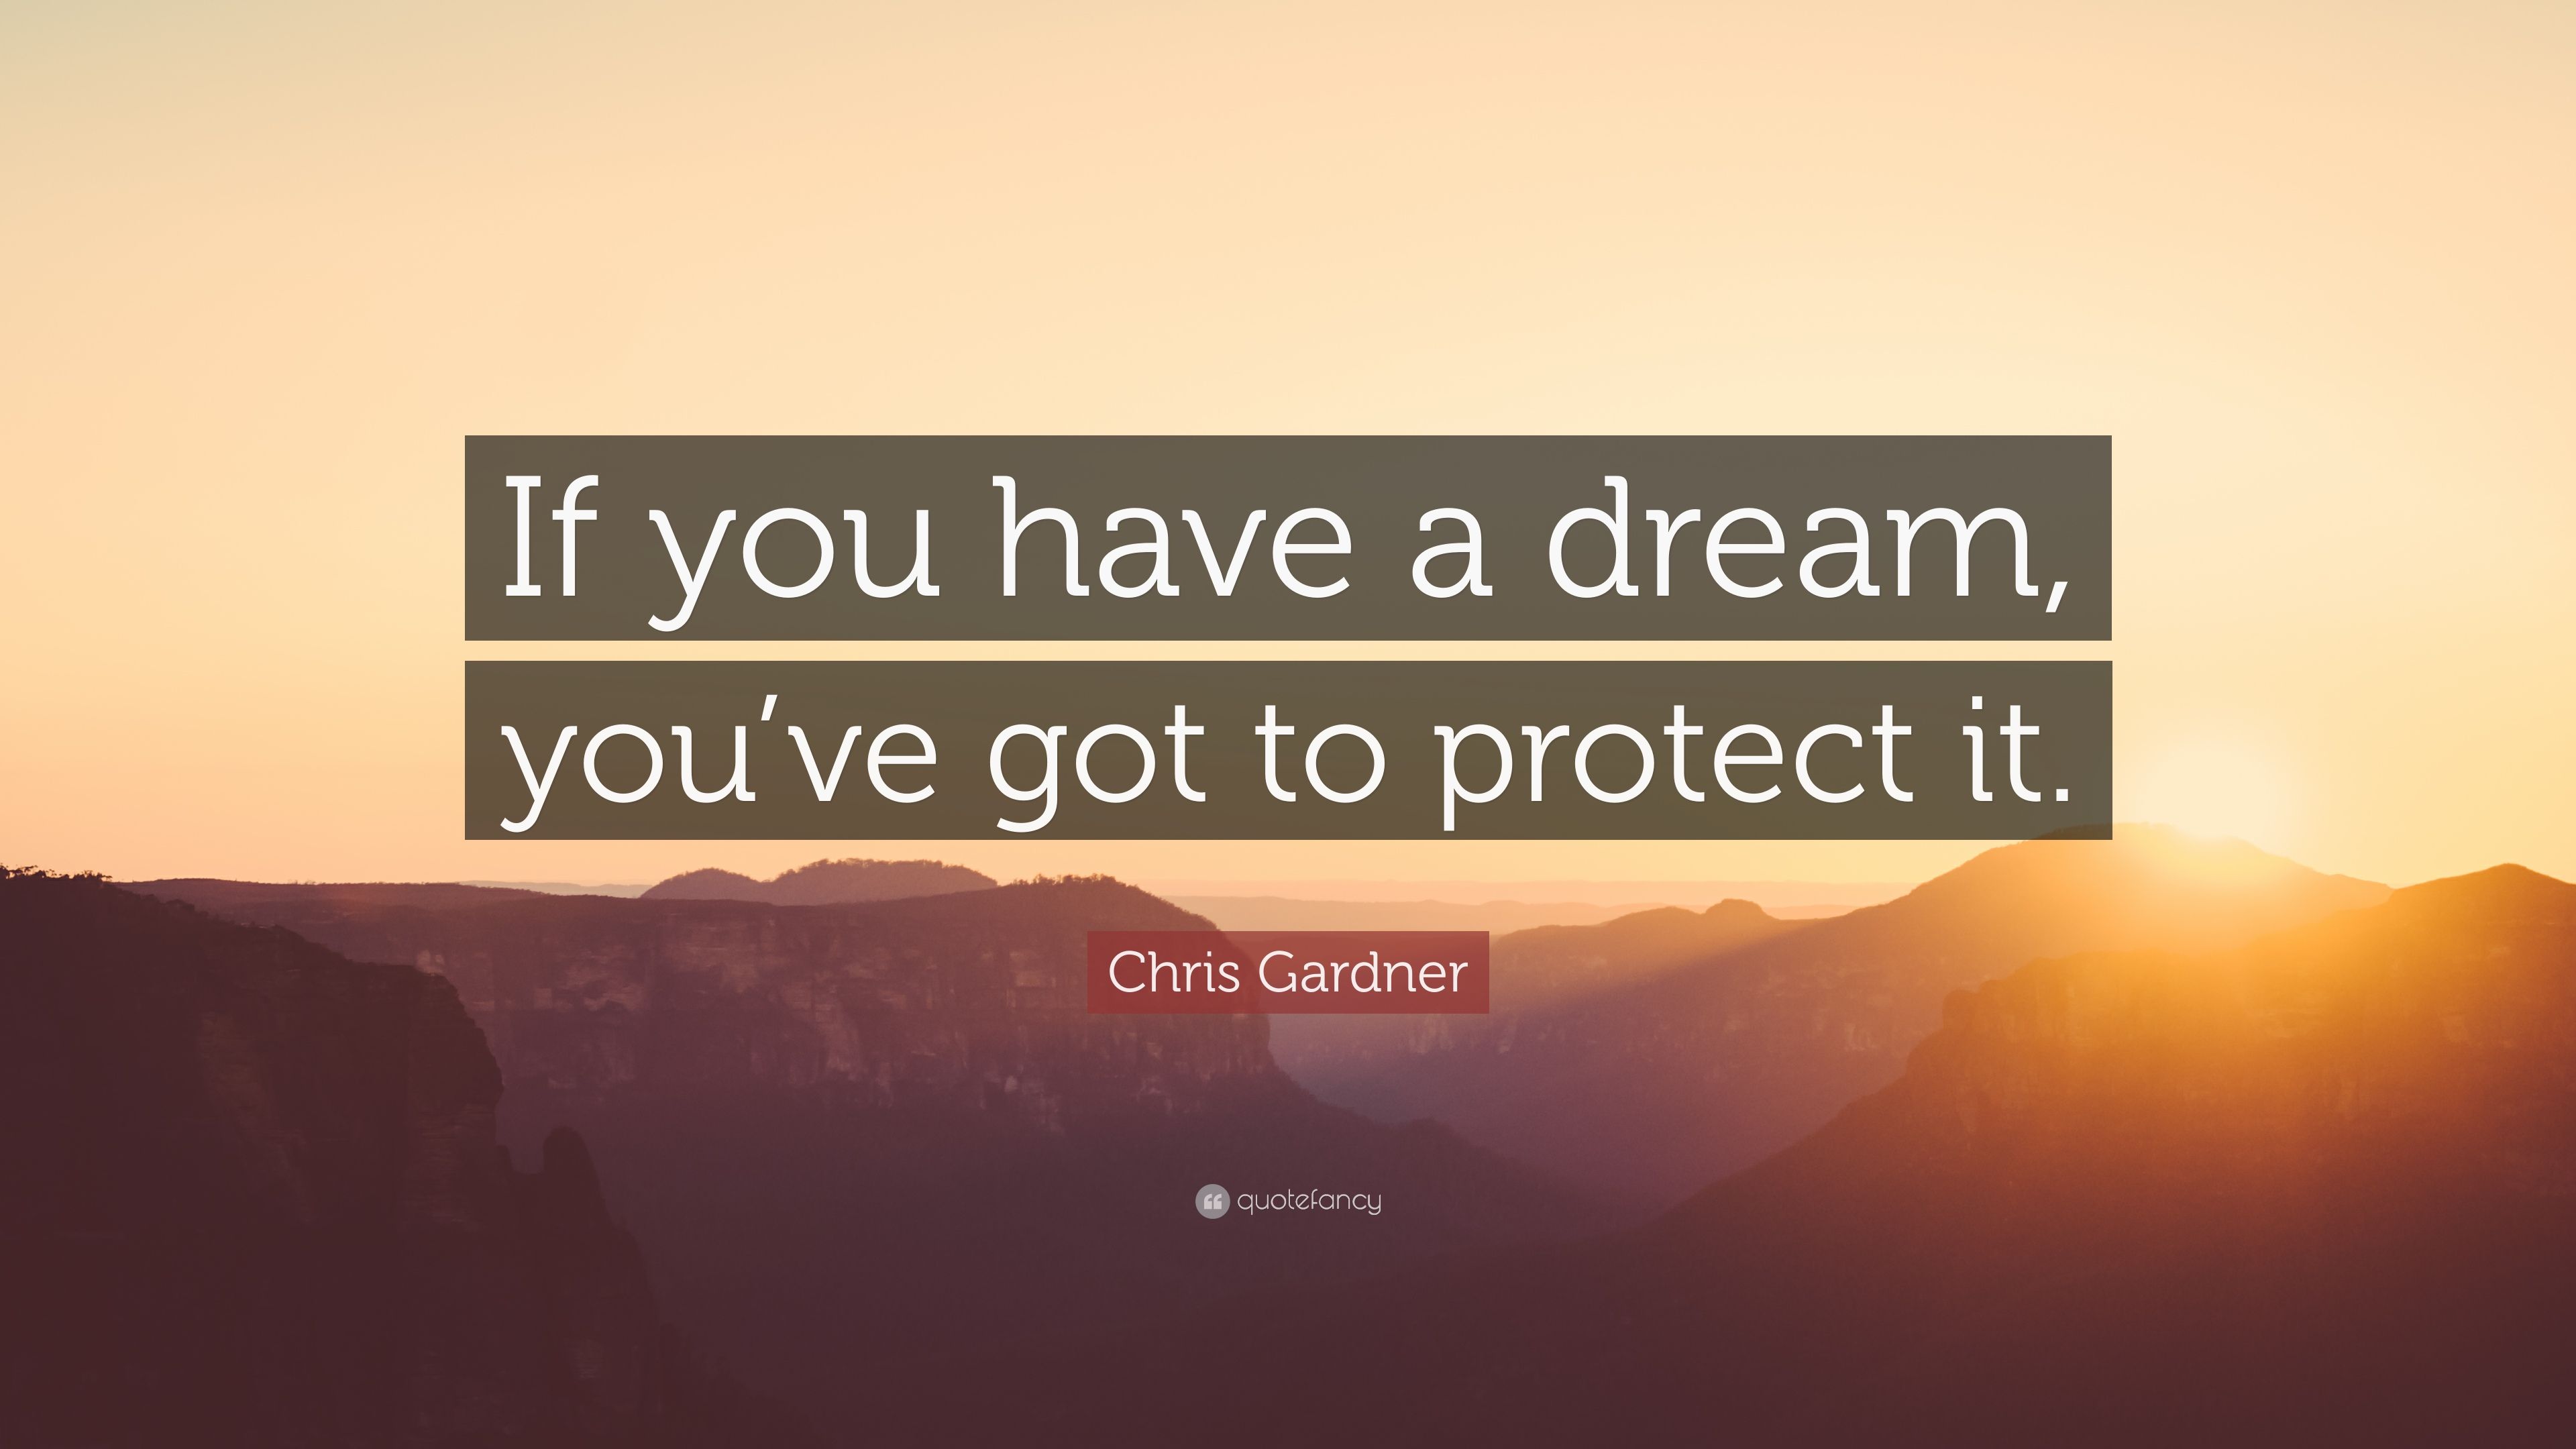 Chris Gardner Quote: "If you have a dream, you've got to protect ...